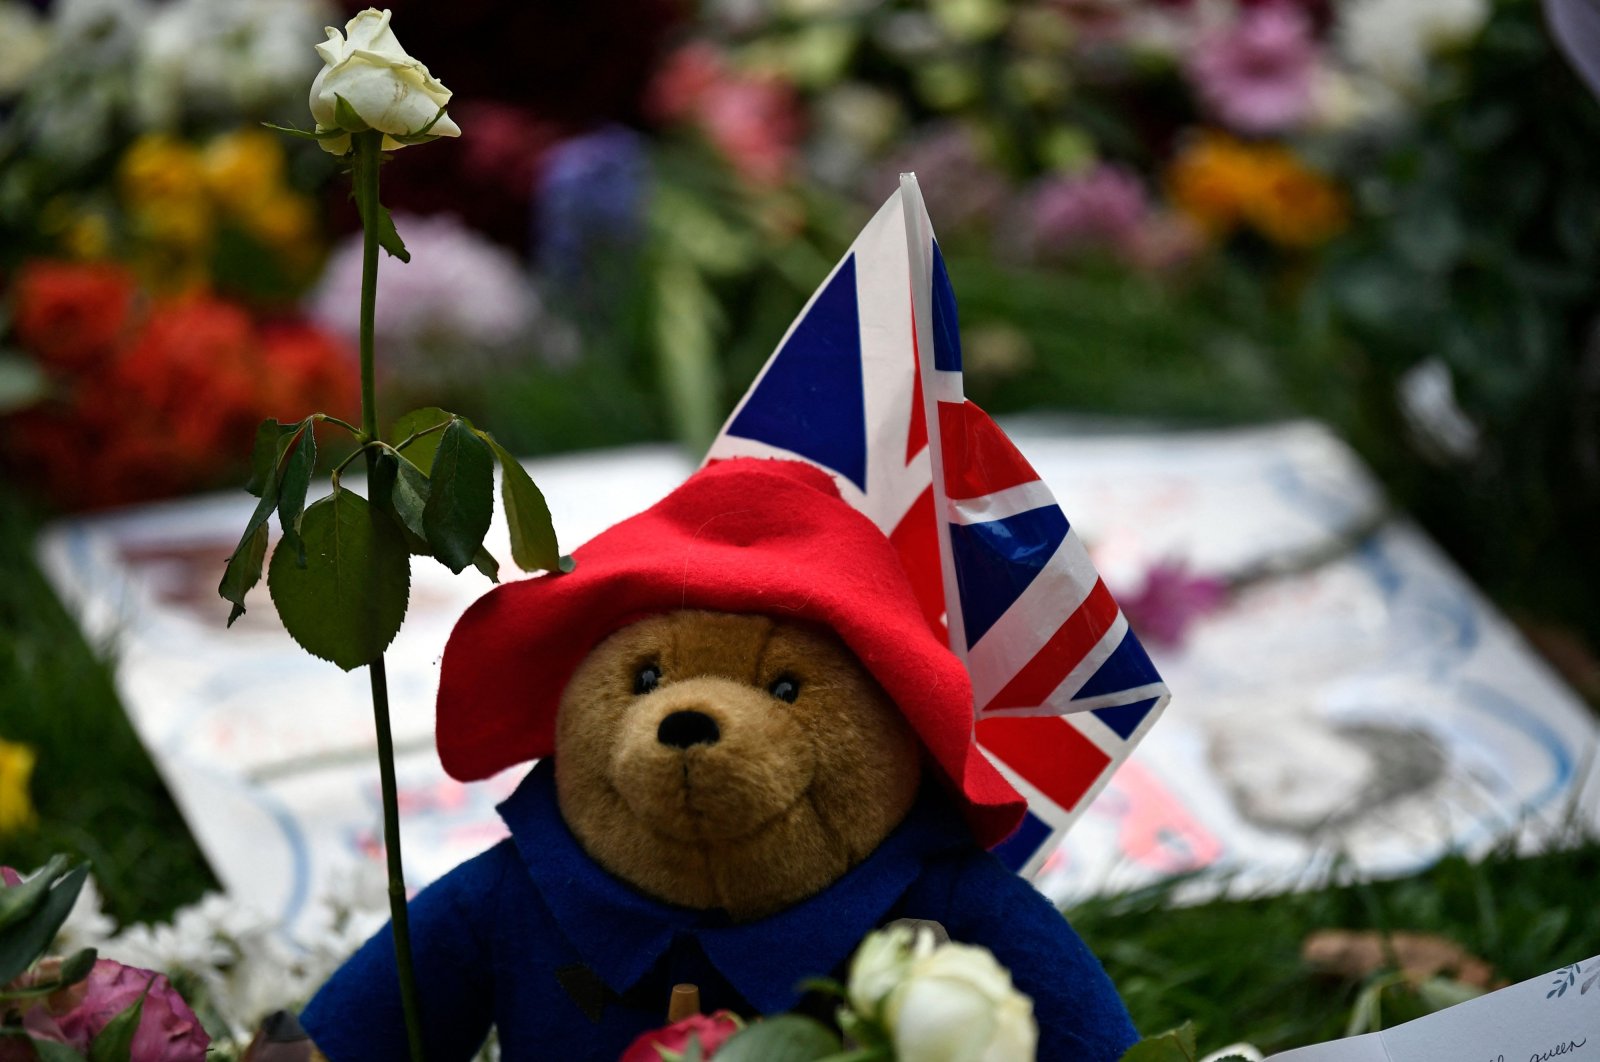 A Paddington Bear teddy bear is pictured with floral tributes in Green Park, near Buckingham Palace, London, U.K., Sept. 11, 2022. (AFP Photo)